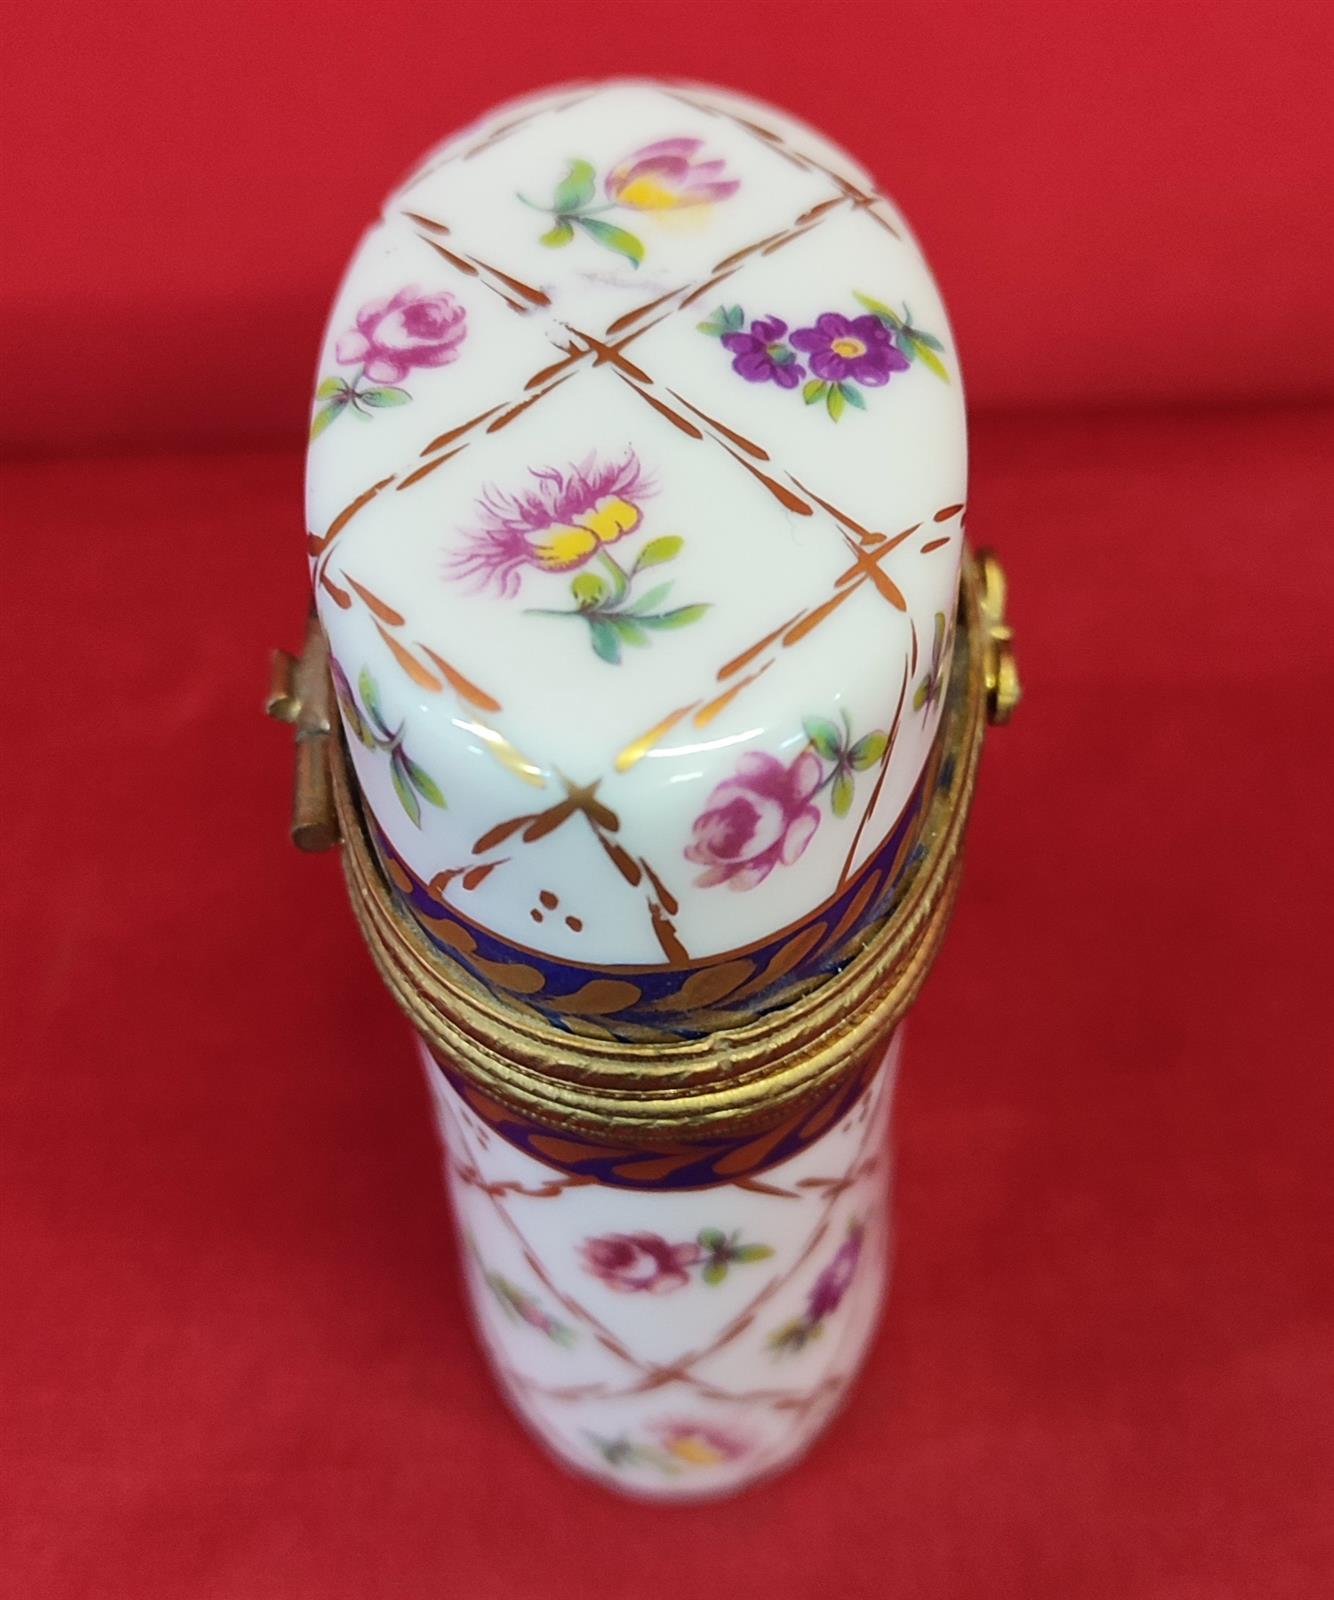 Small Limoges jewelry box